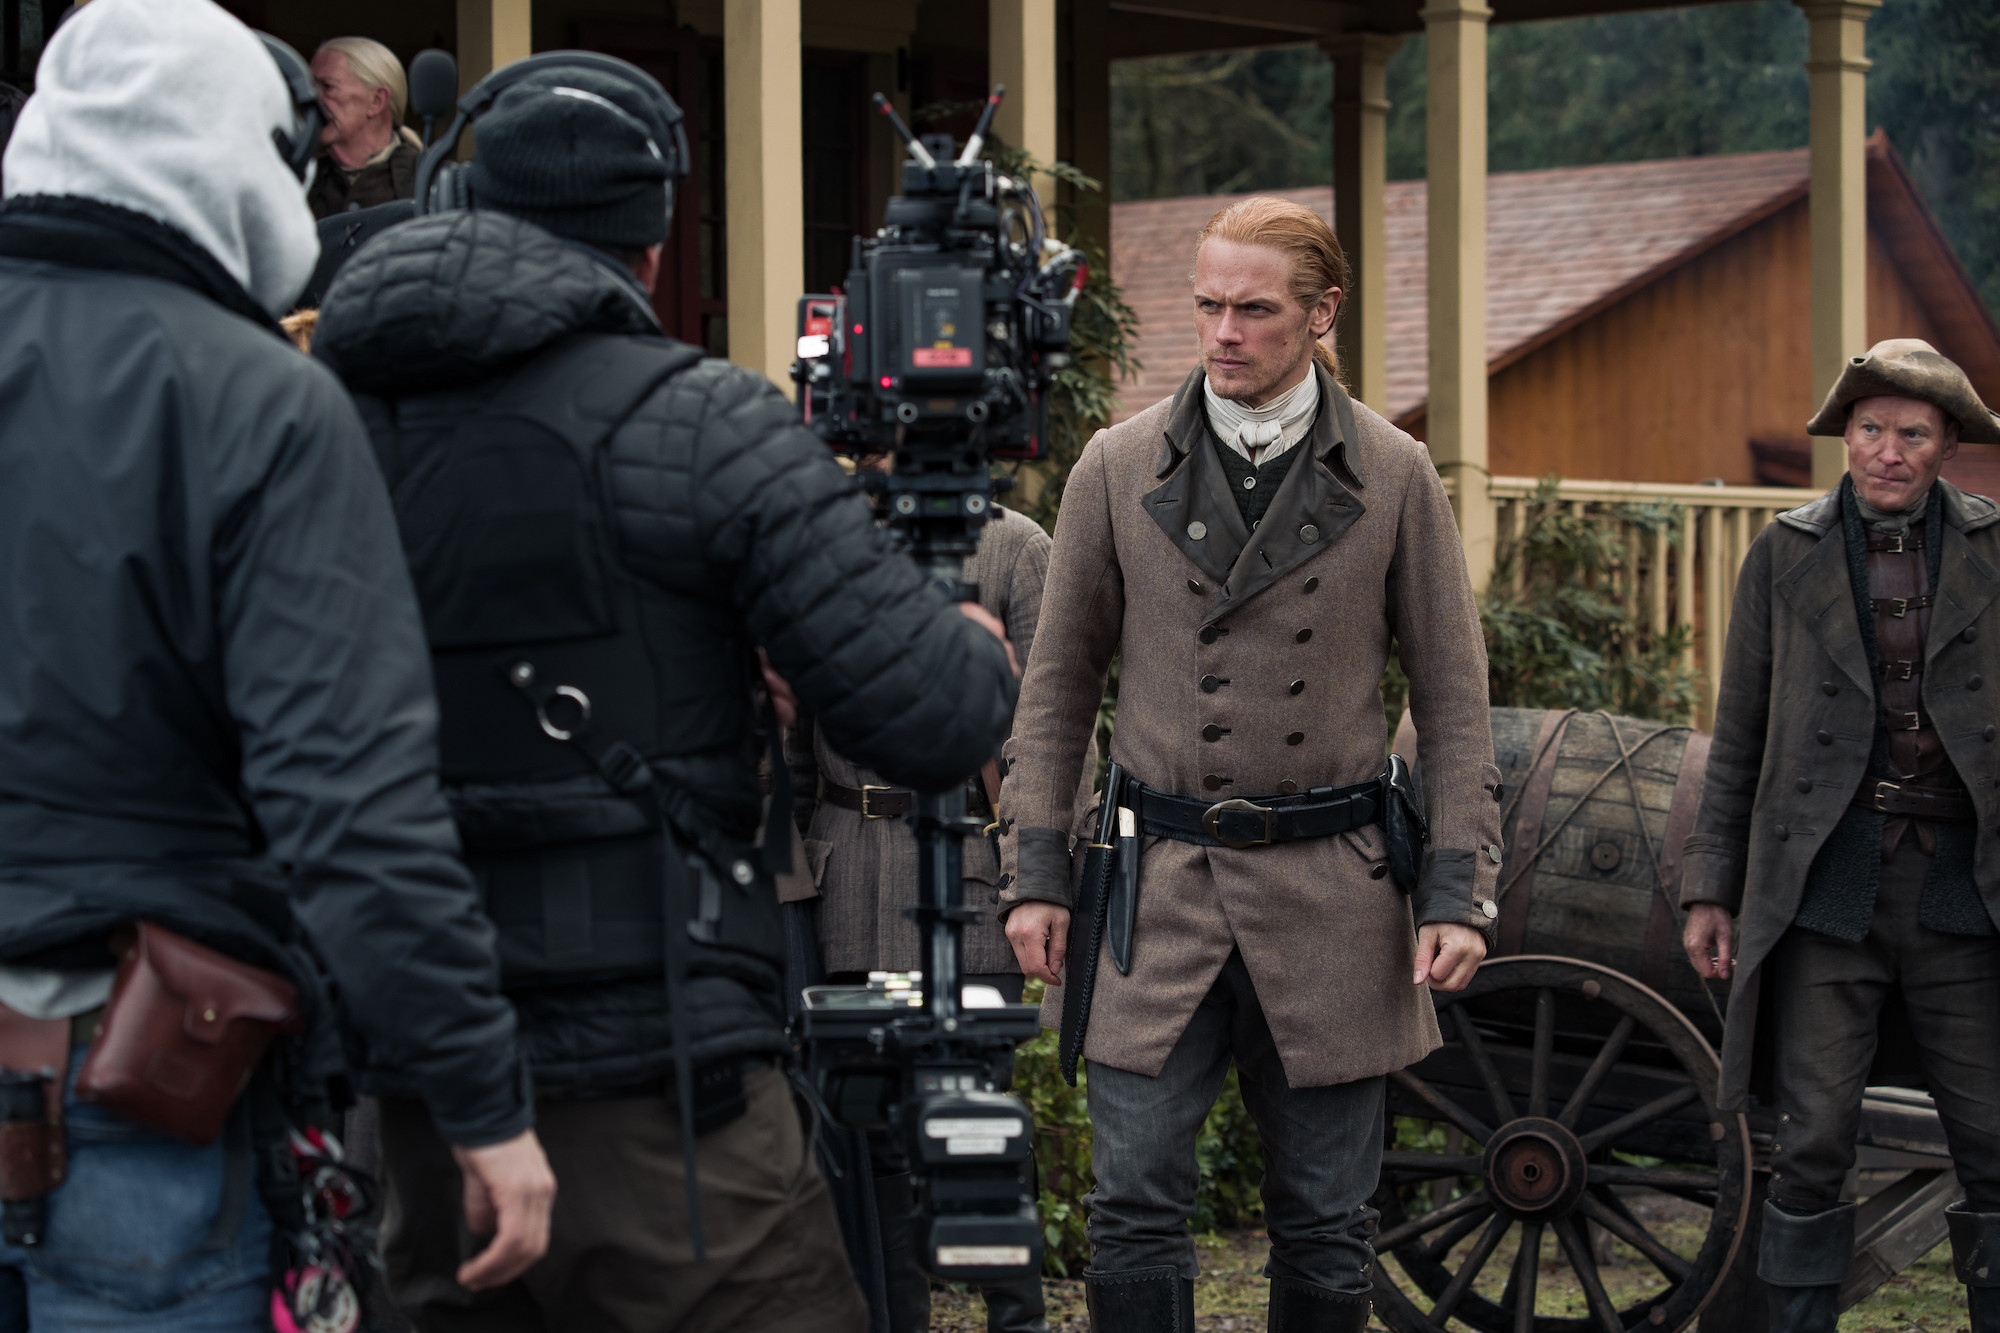 'Outlander': Sam Heughan stands in front of the camera crew in costume